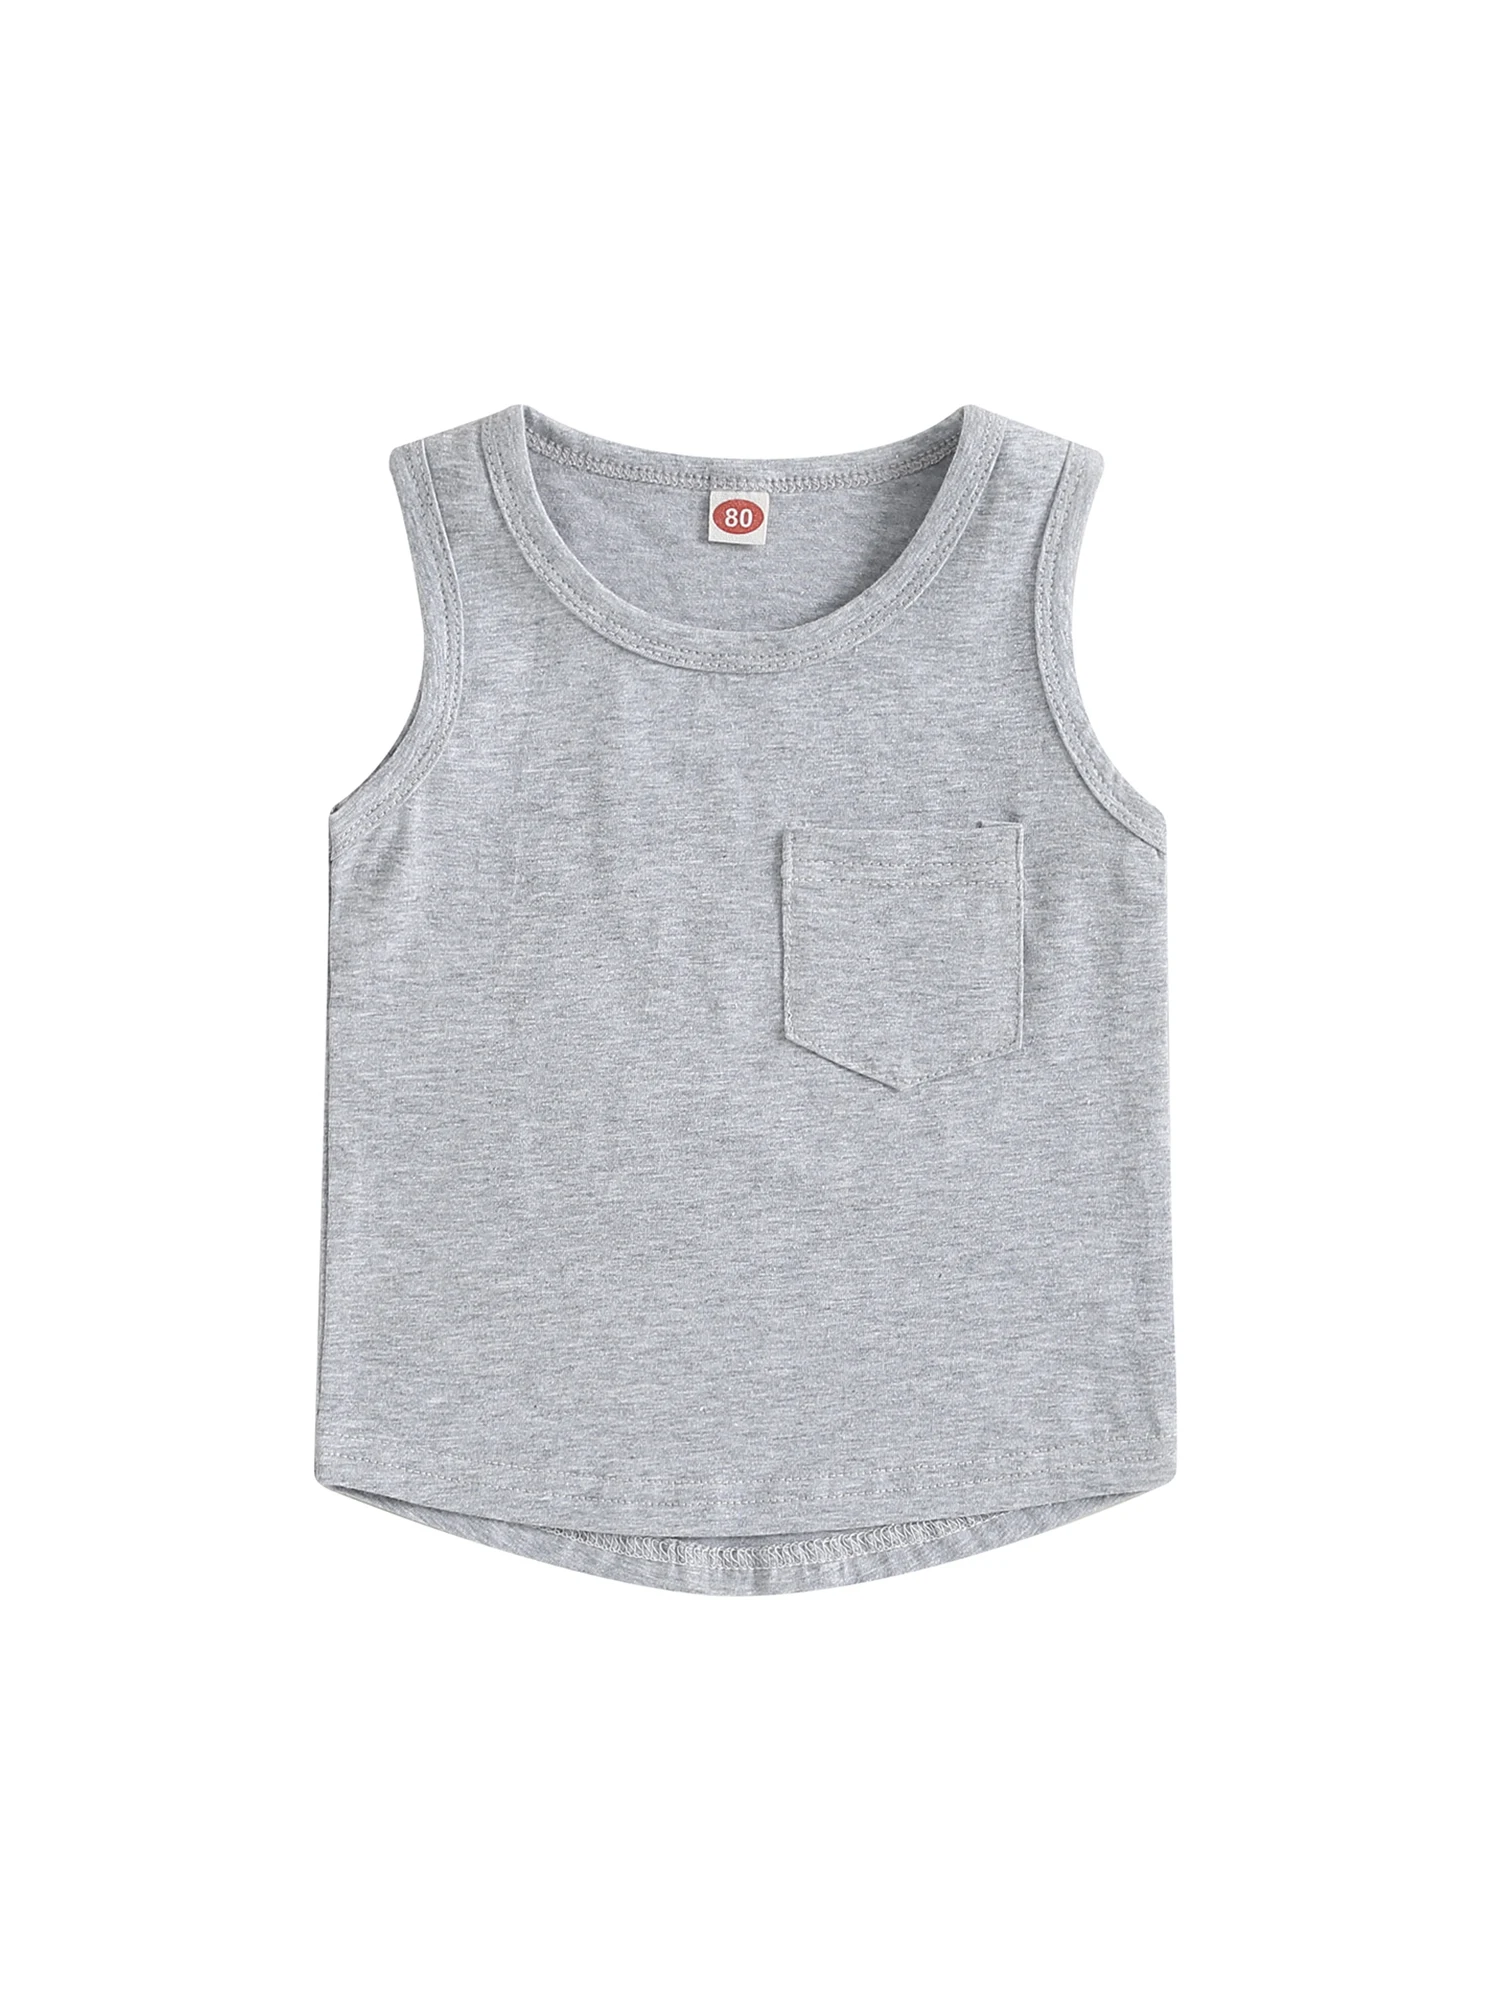 

Toddler Baby Boy Tank Tops Solid Crew Neck Sleeveless T Shirt with Pocket 2T 3T 4T Baby Boy Clothes Summer Outfit